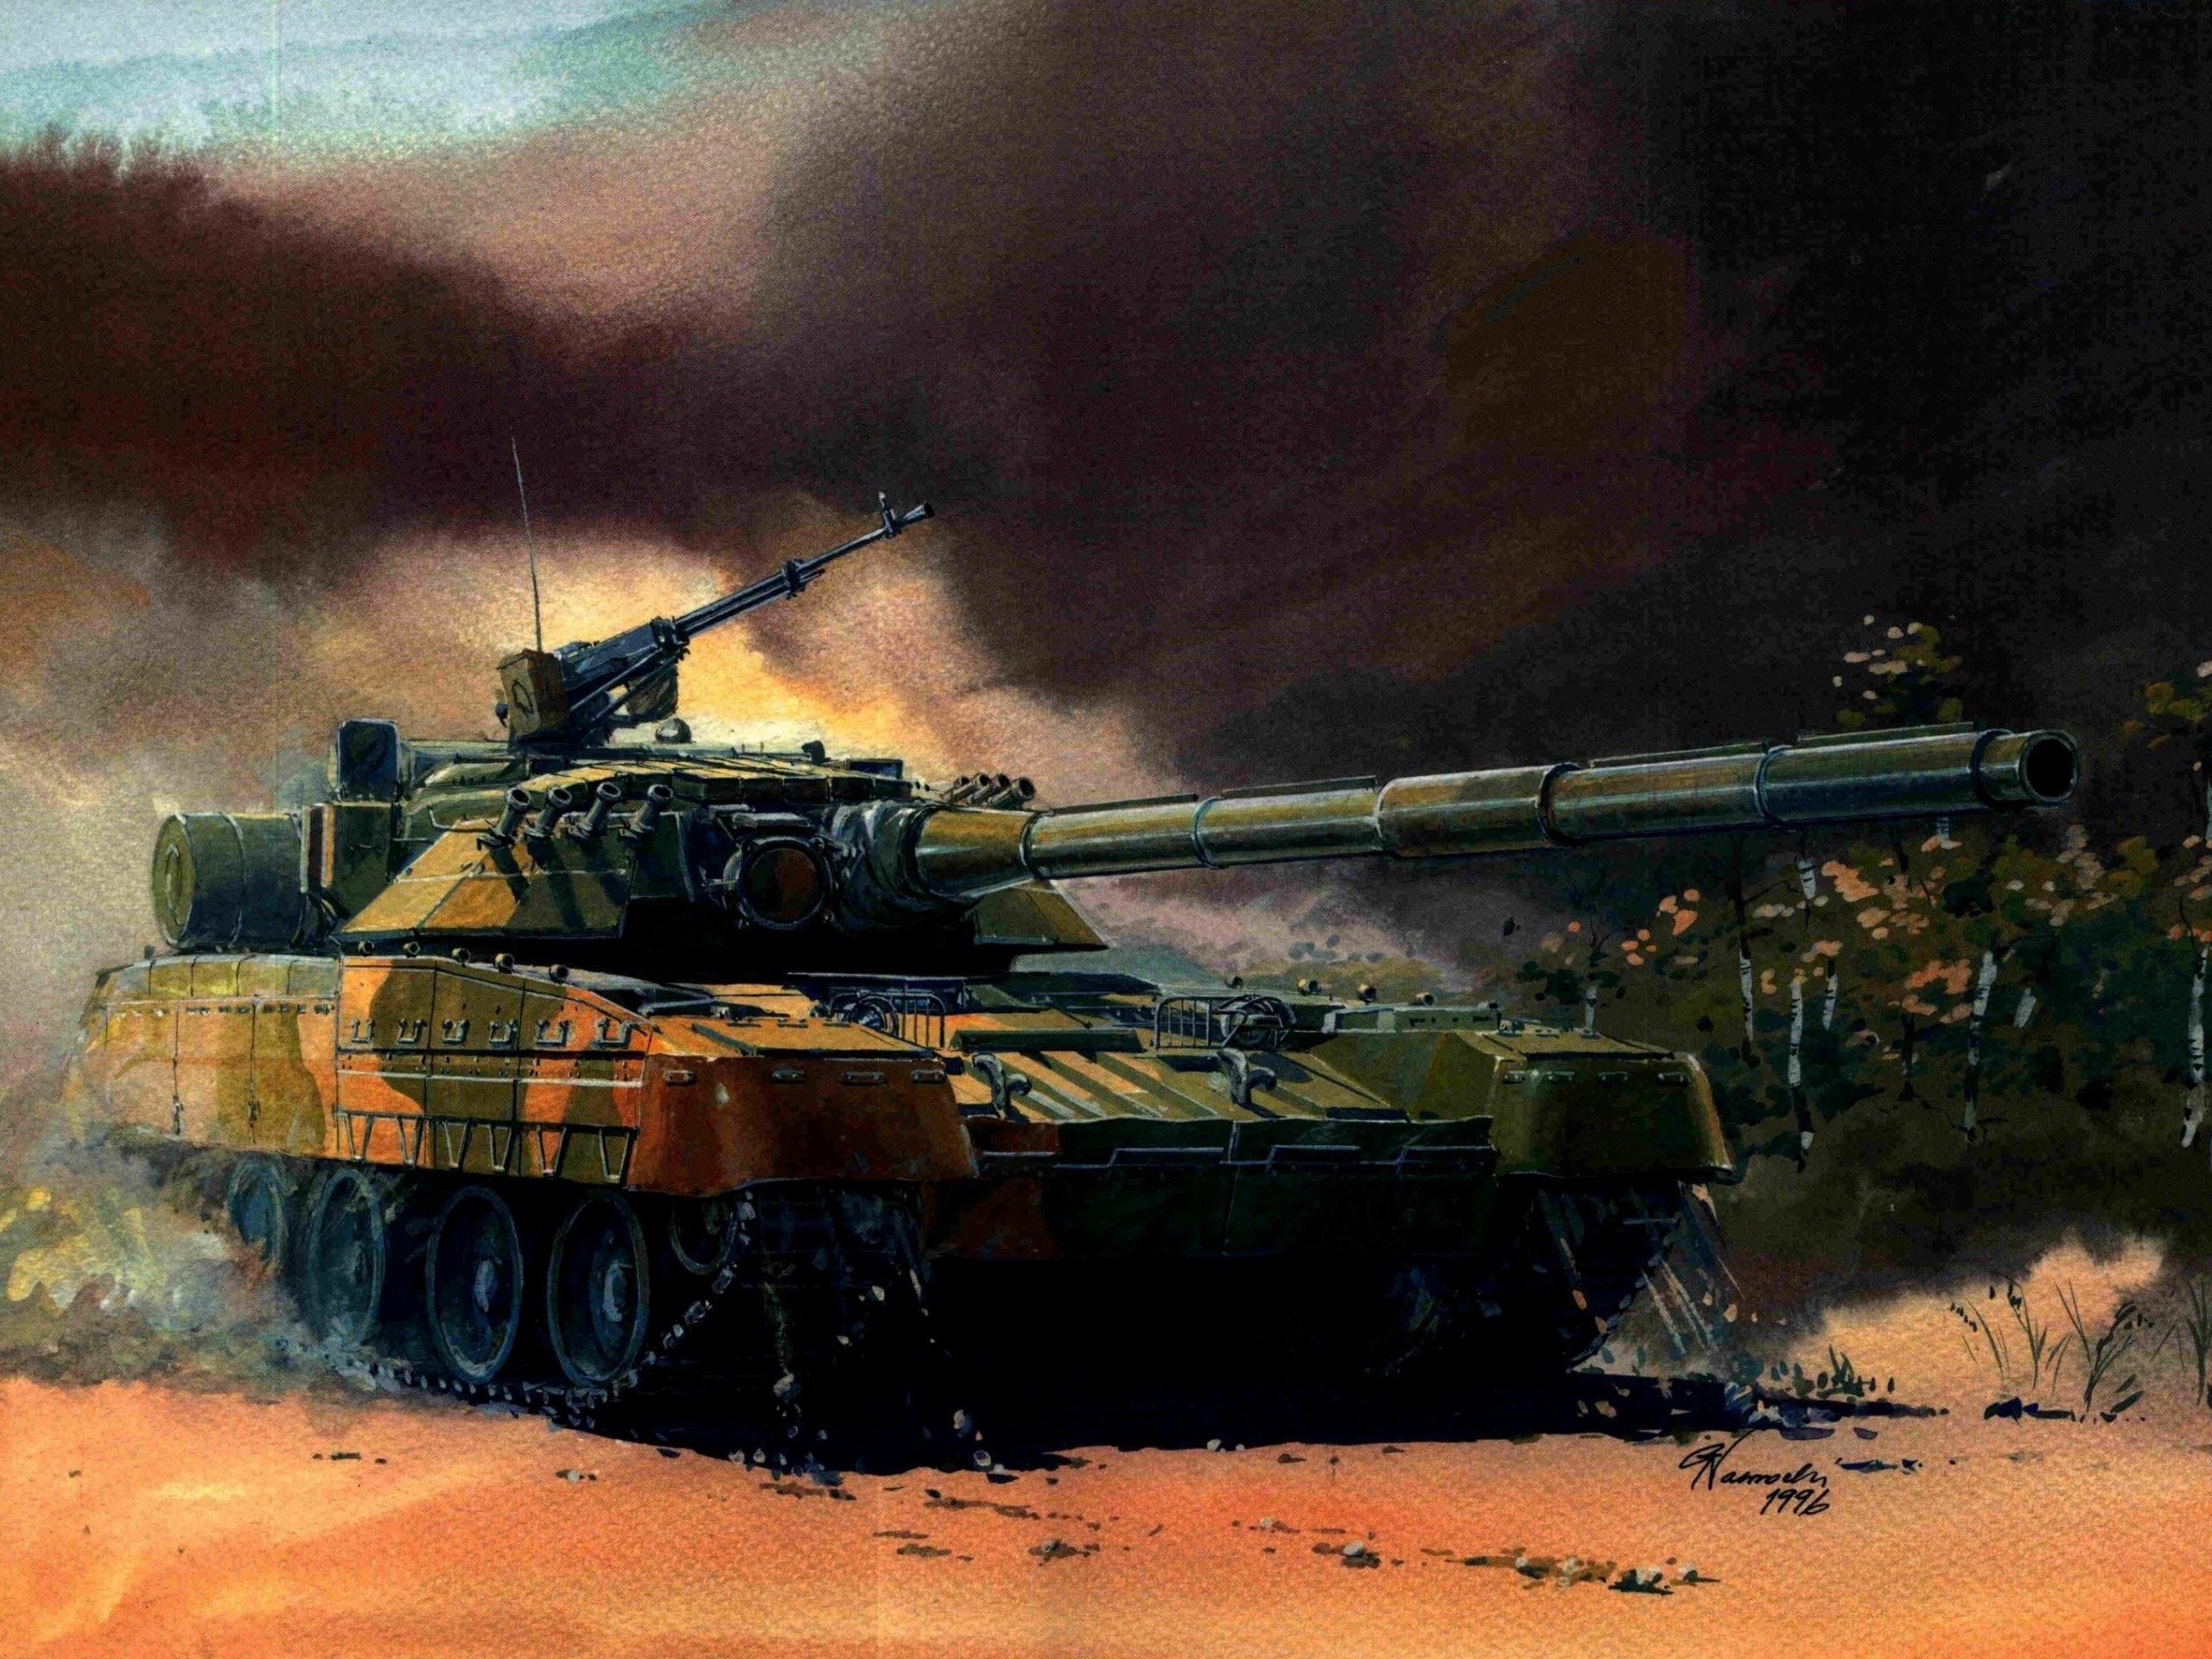 Military tank on a desktop wallpaper with a panther design